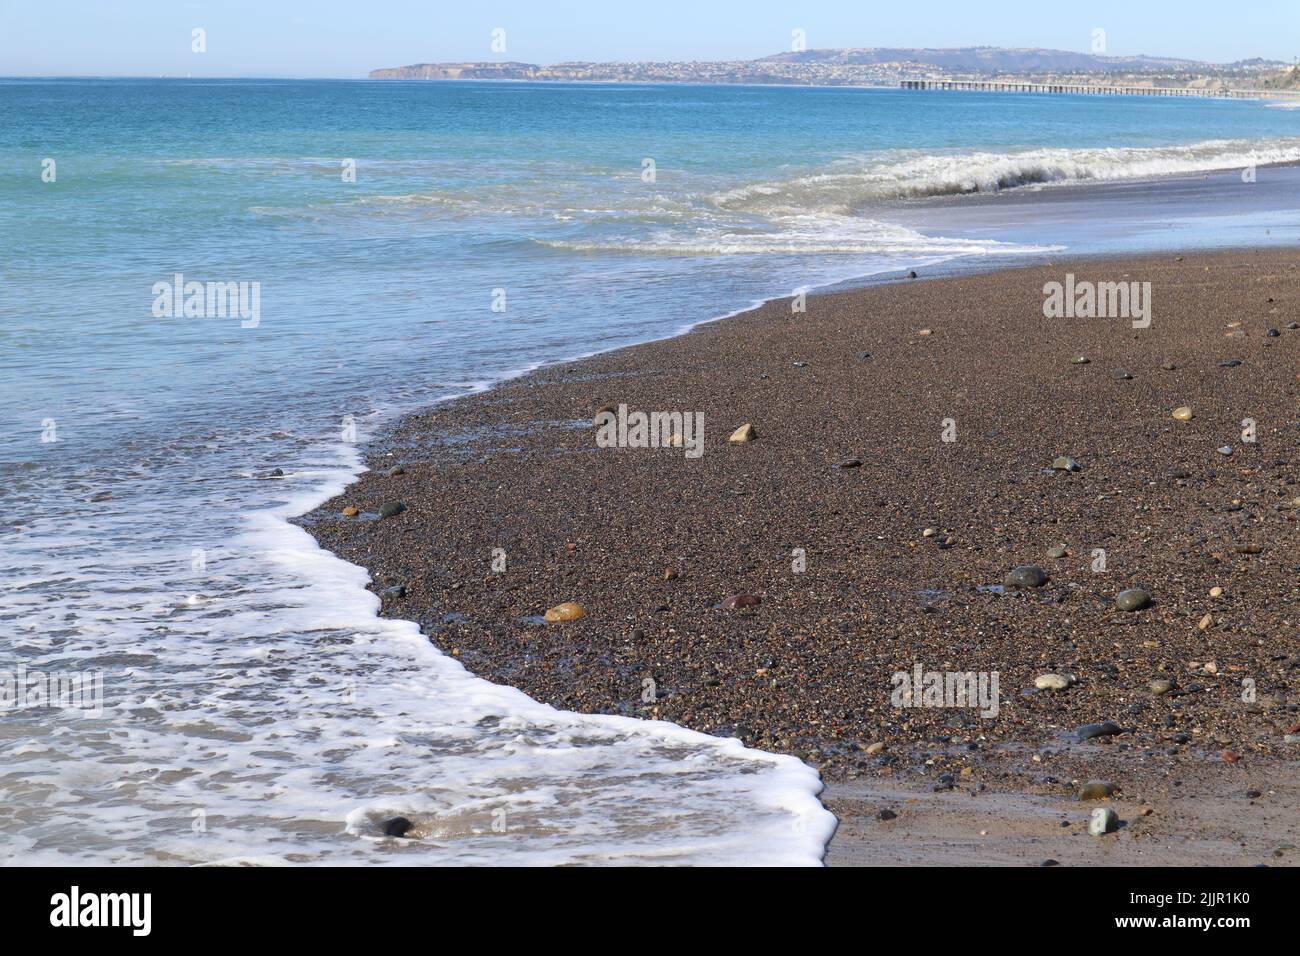 A natural view of the sandy beach in San Clemente, California, USA Stock Photo